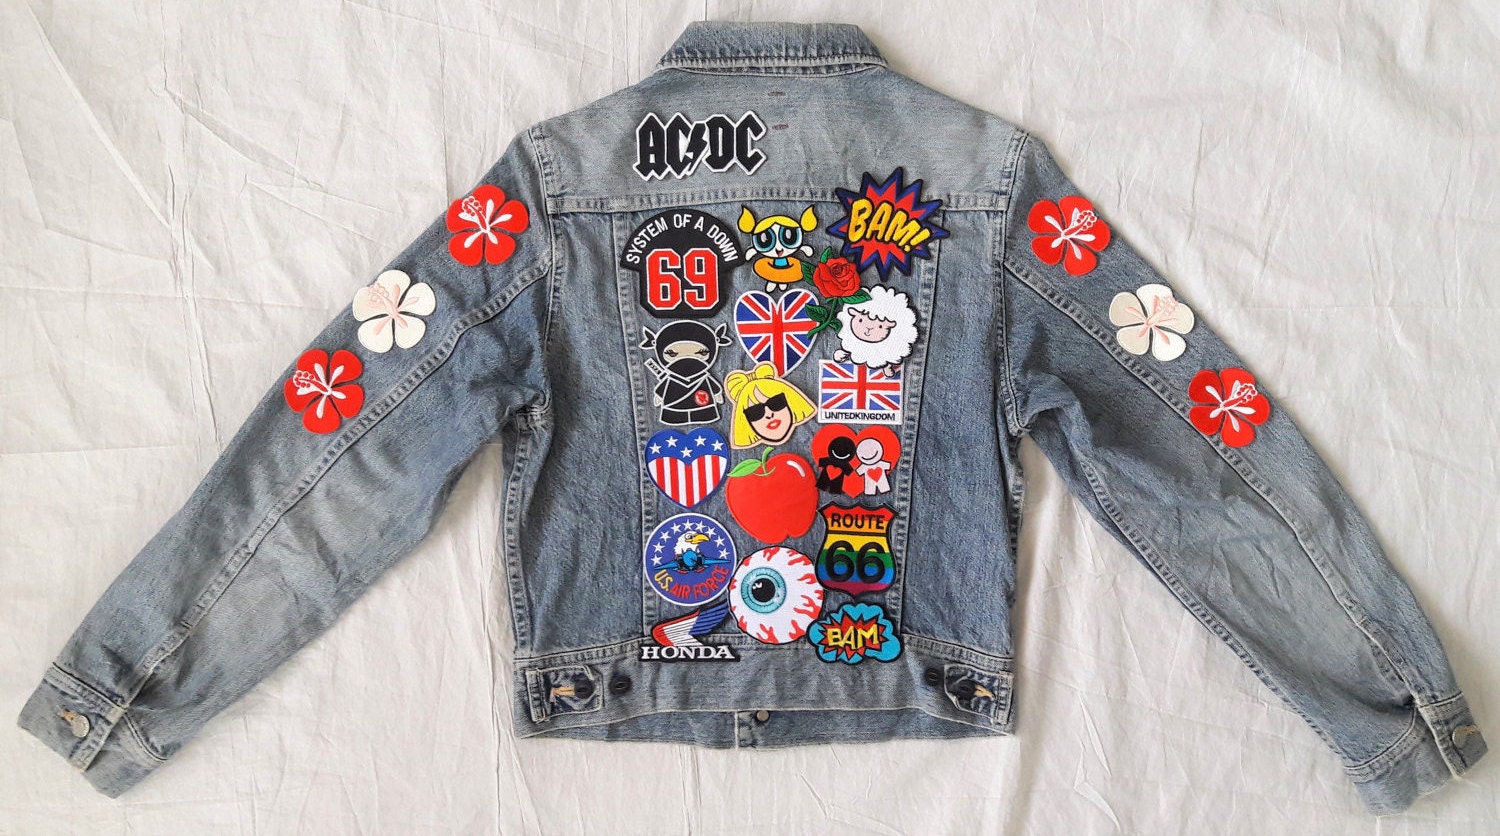 Patched Denim Hand Reworked Vintage Jean Jacket with Patches 